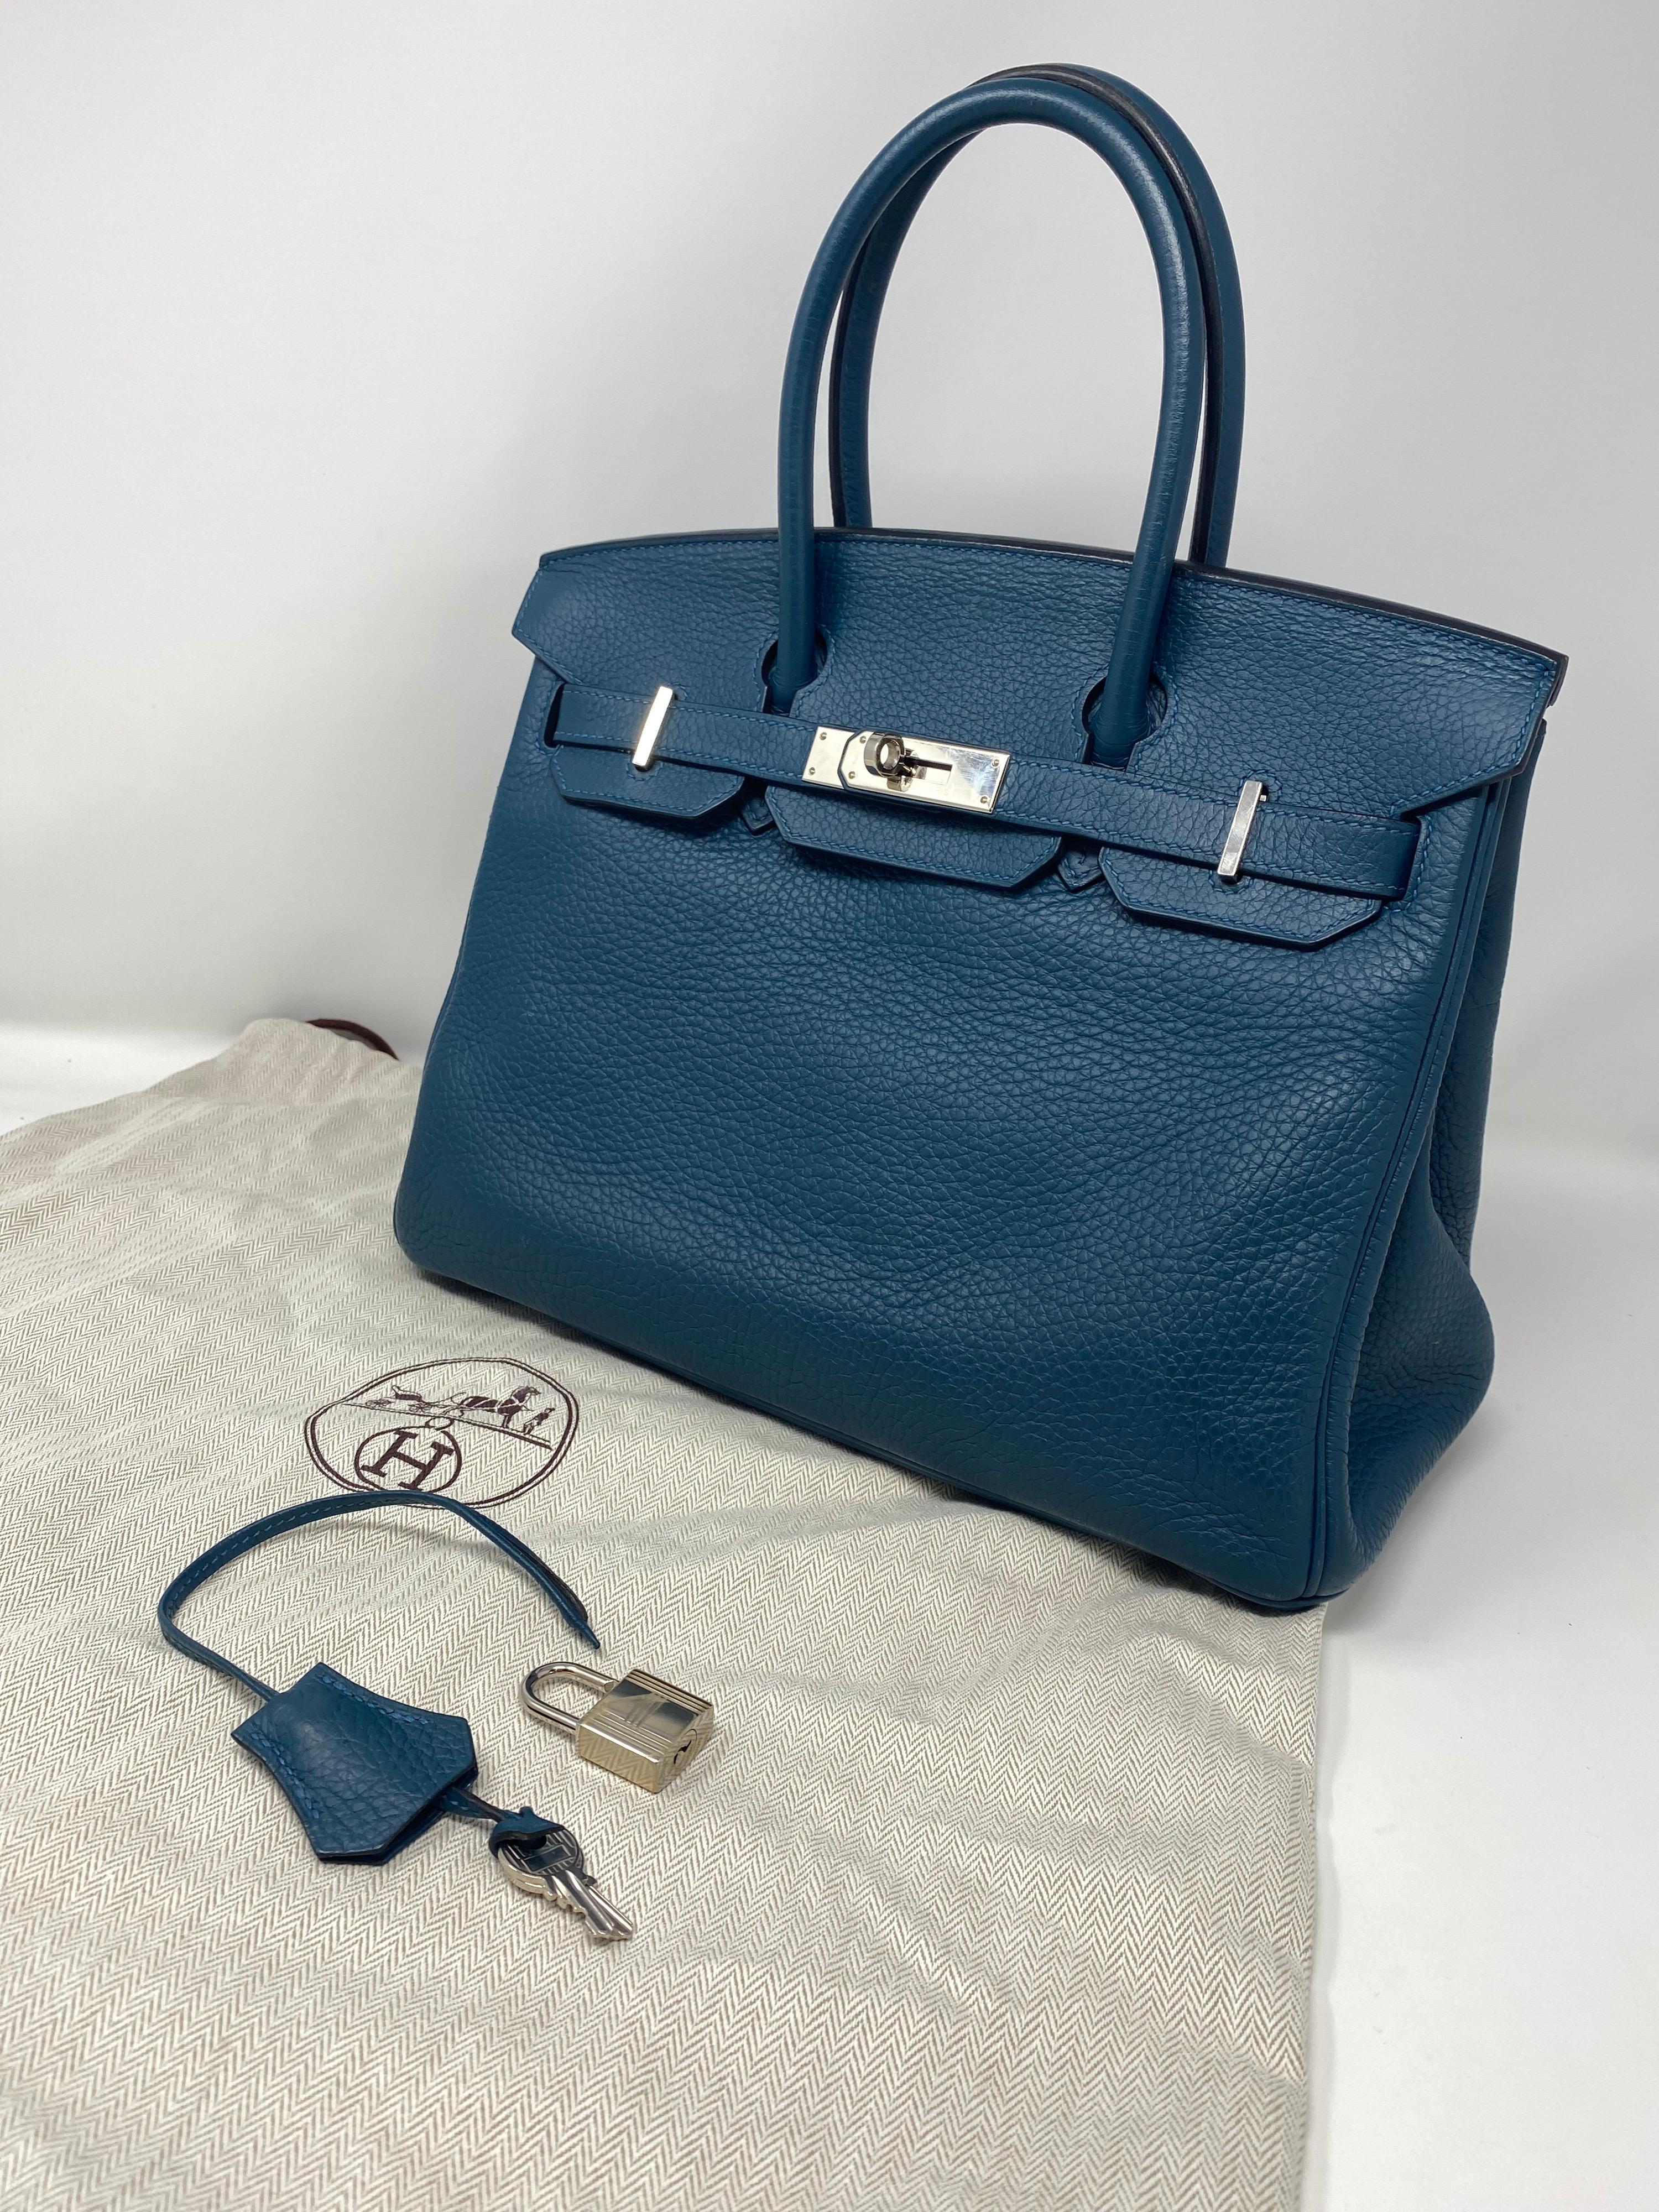 Hermes Birkin 30 Blue Colvert. Mint condition Birkin Bag. Highly coveted 30 size. Neutral blue color. Palladium hardware. Includes dust cover, clochette, and keys. Guaranteed authentic. 